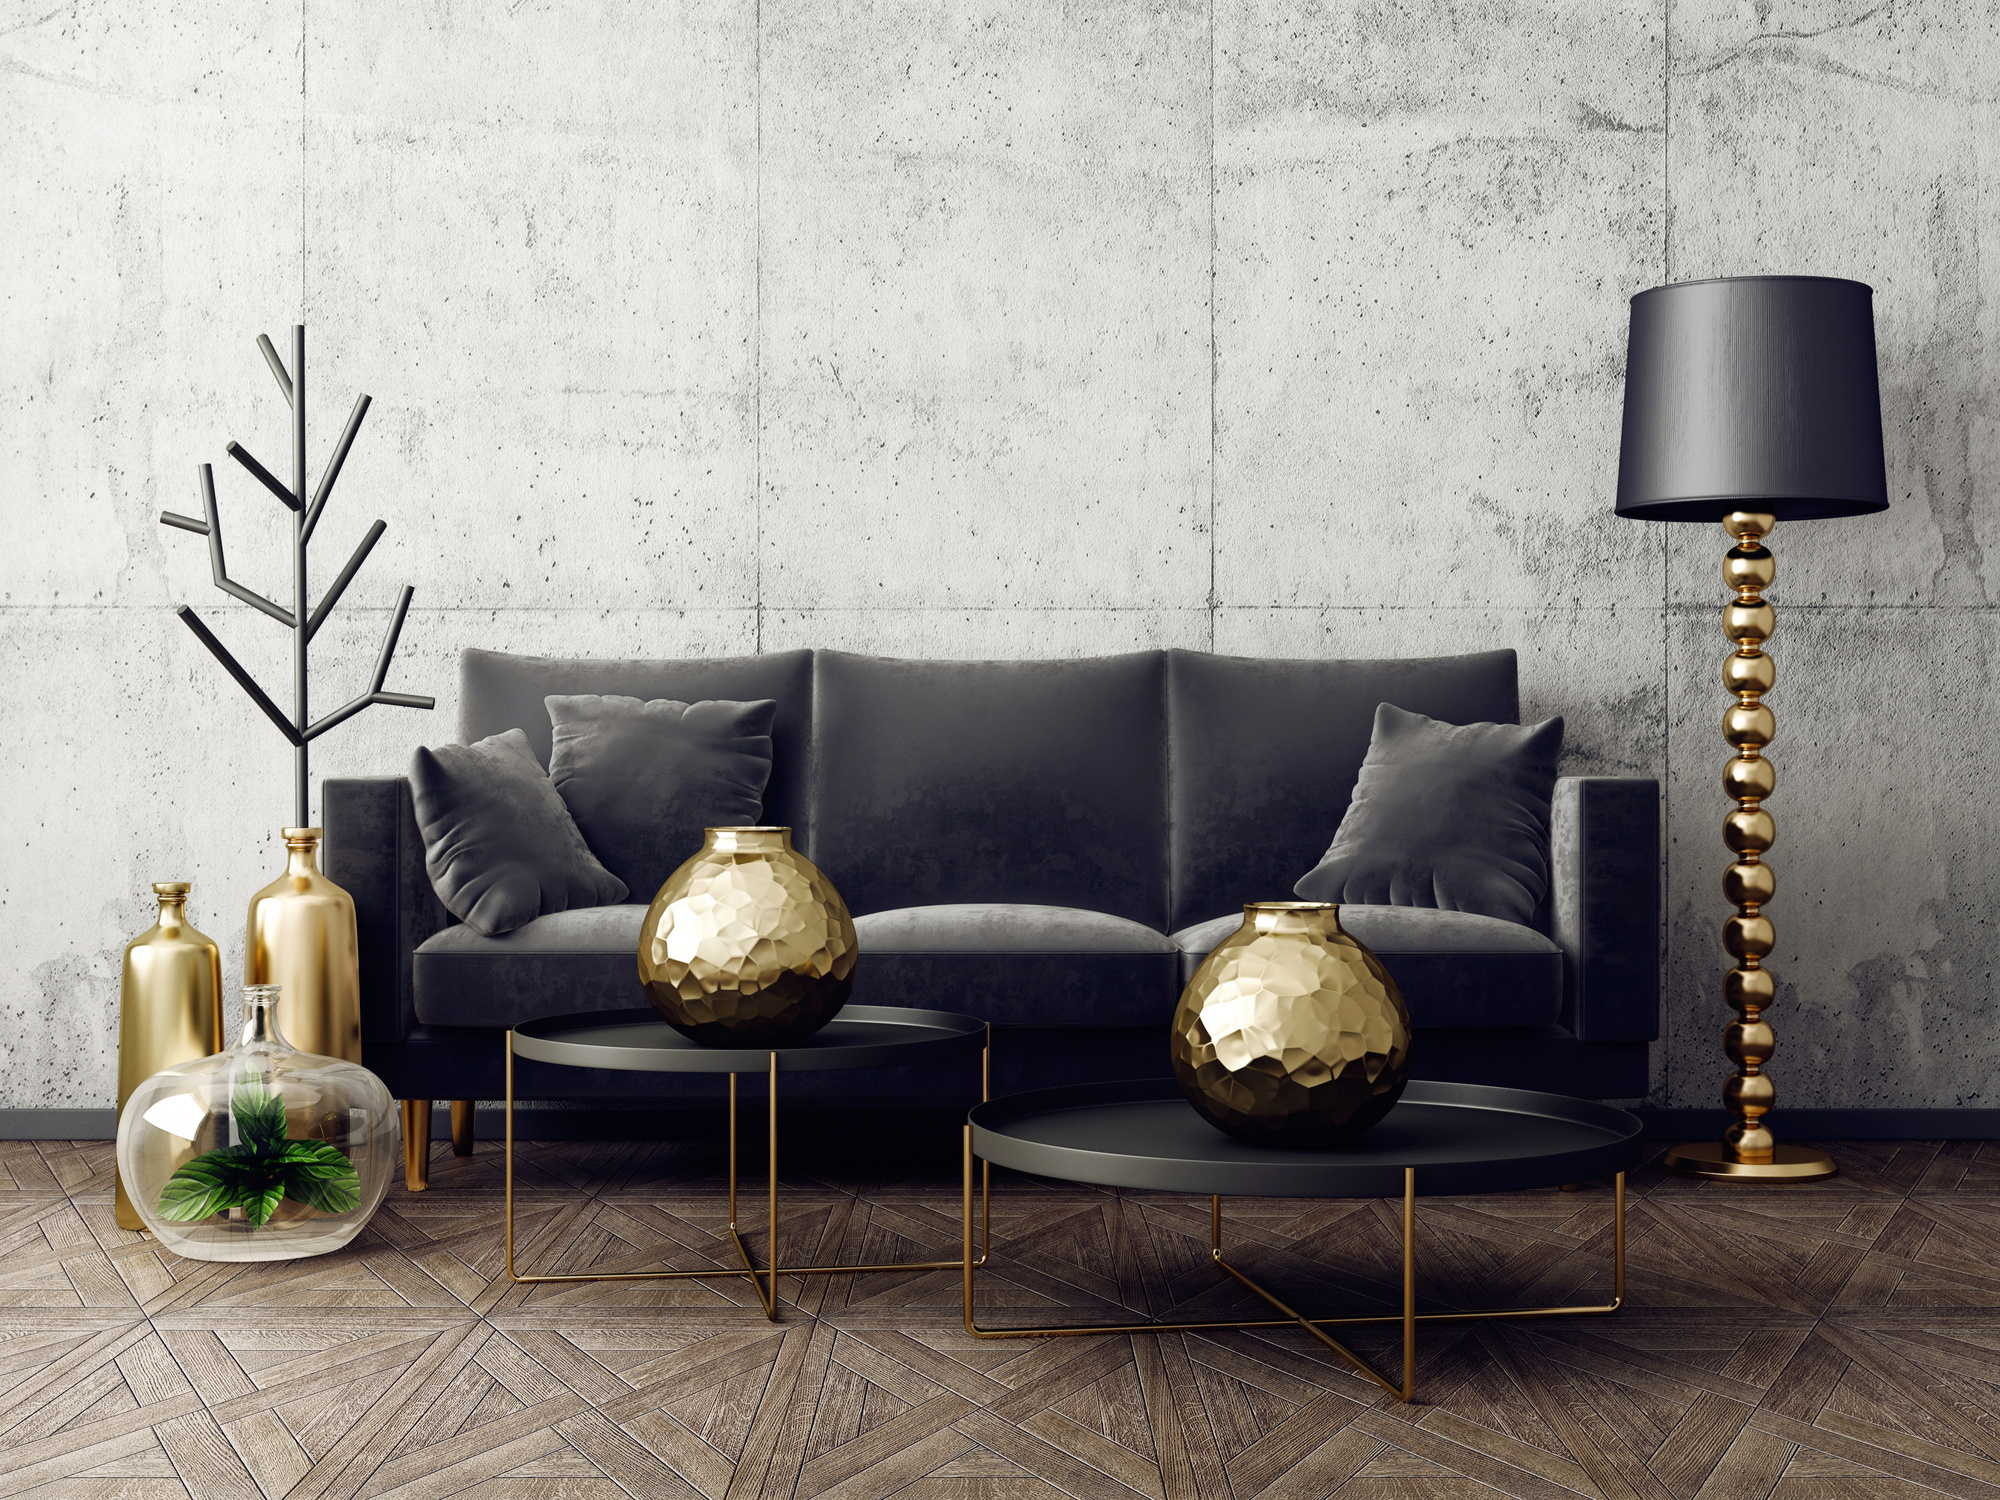 Black and Gold Colors of a Living Room 